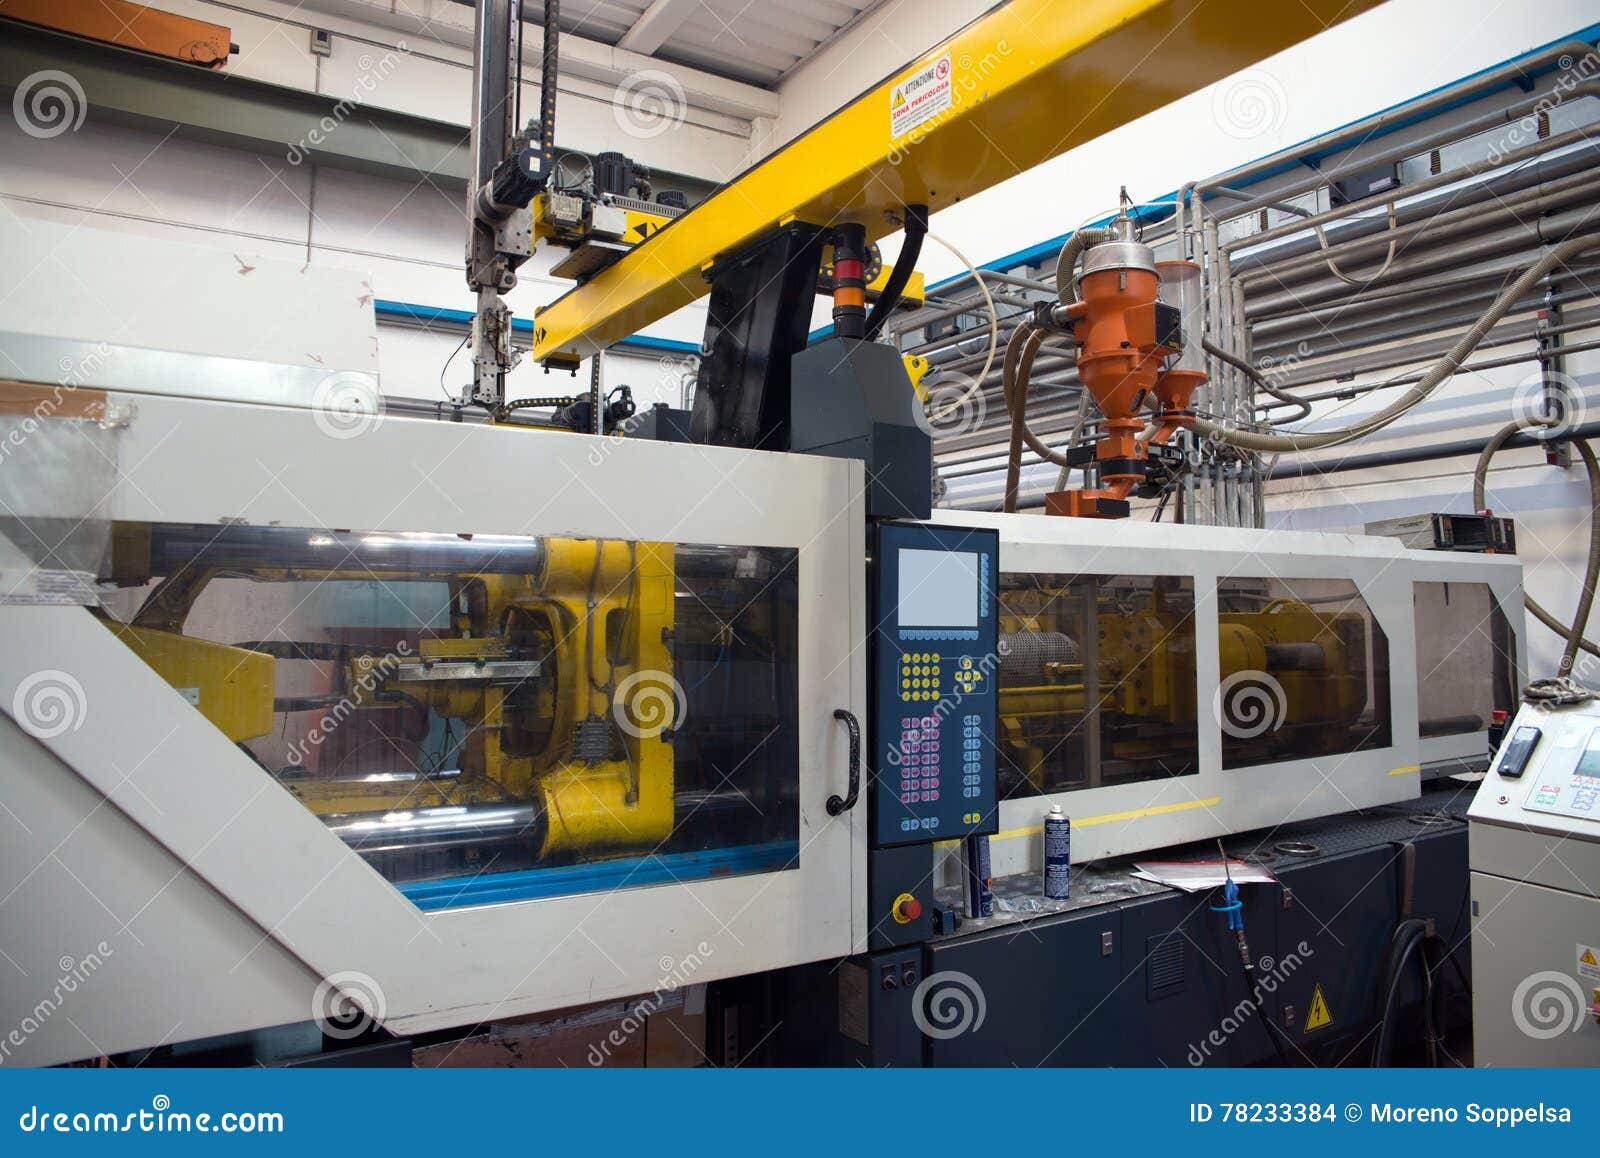 injection molding machines in a large factory